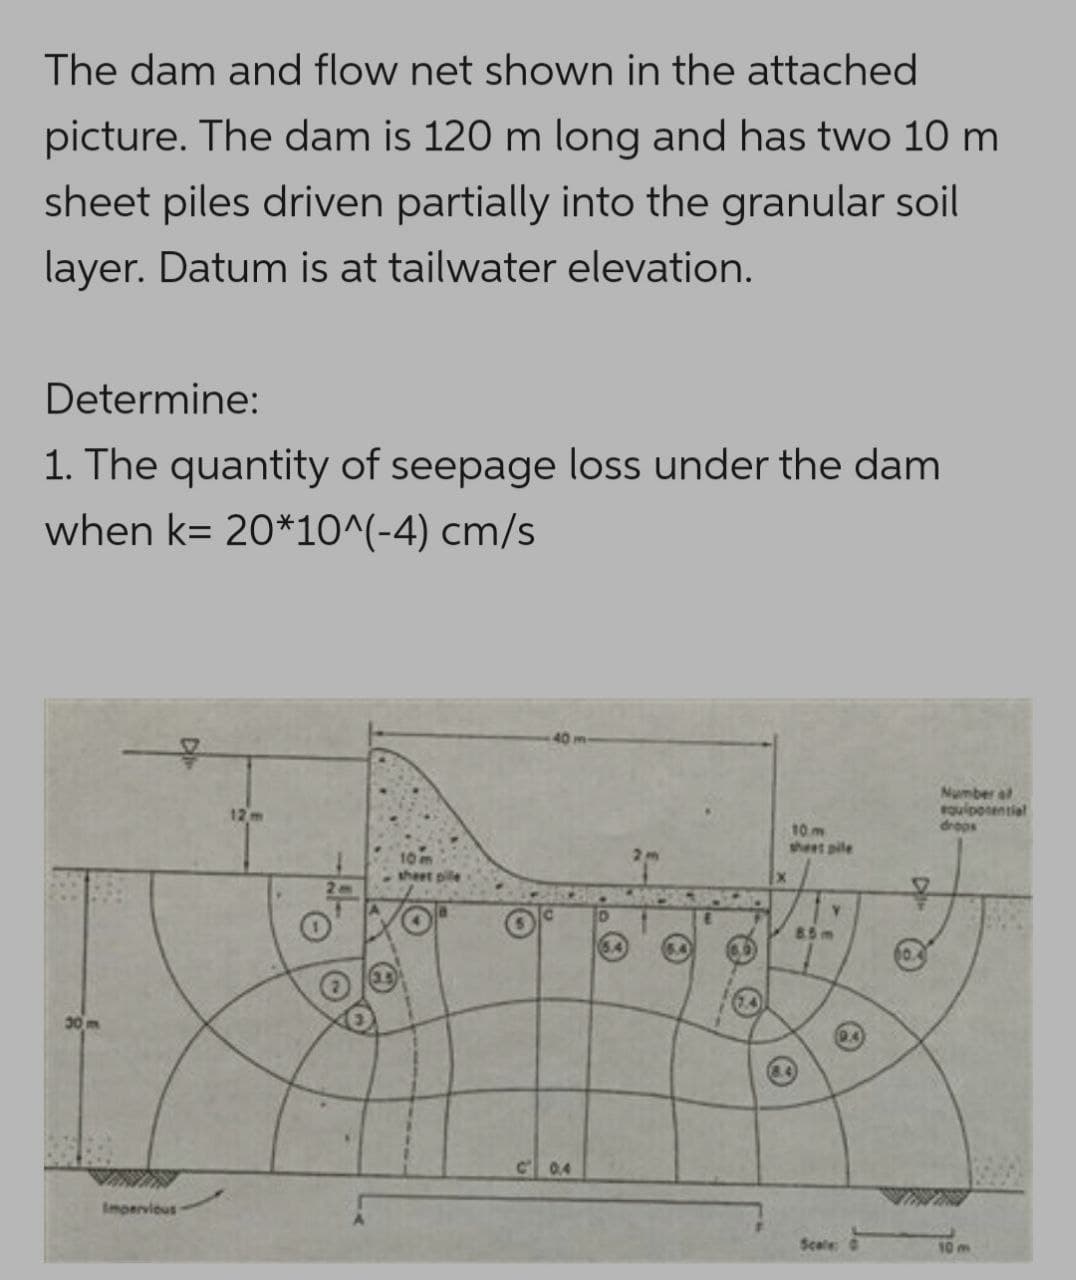 The dam and flow net shown in the attached
picture. The dam is 120 m long and has two 10 m
sheet piles driven partially into the granular soil
layer. Datum is at tailwater elevation.
Determine:
1. The quantity of seepage loss under the dam
when k= 20*10^(-4) cm/s
12 m
10 m
sheet pile
10m
sheet pille
85m
30 m
Impervious -
O
C 0.4
1
Scale:
Number al
equipotential
drops